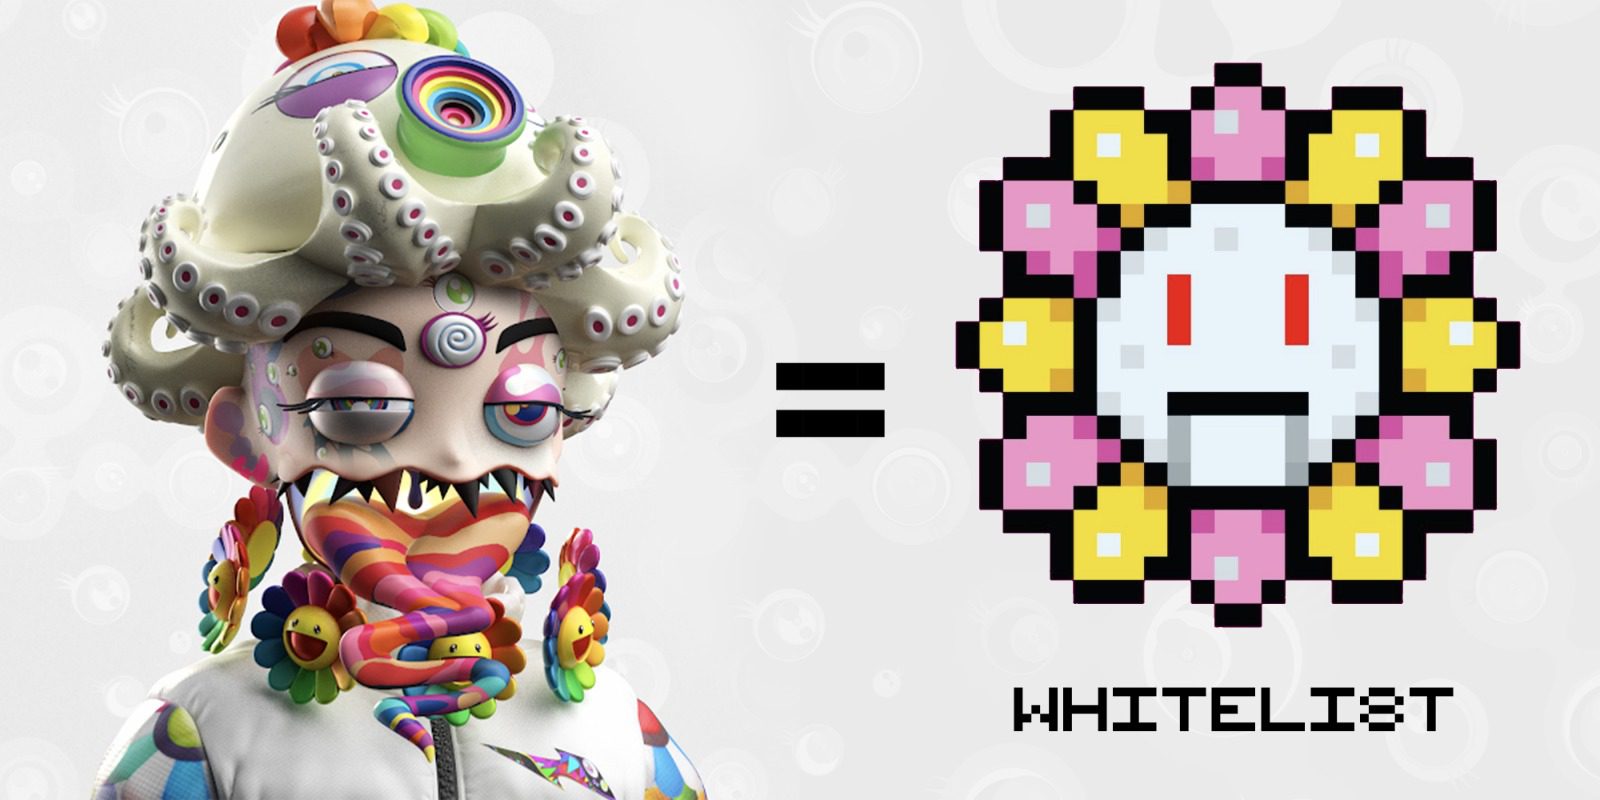 Takashi Murakami.Flowers NFT collection: Everything We Know So Far